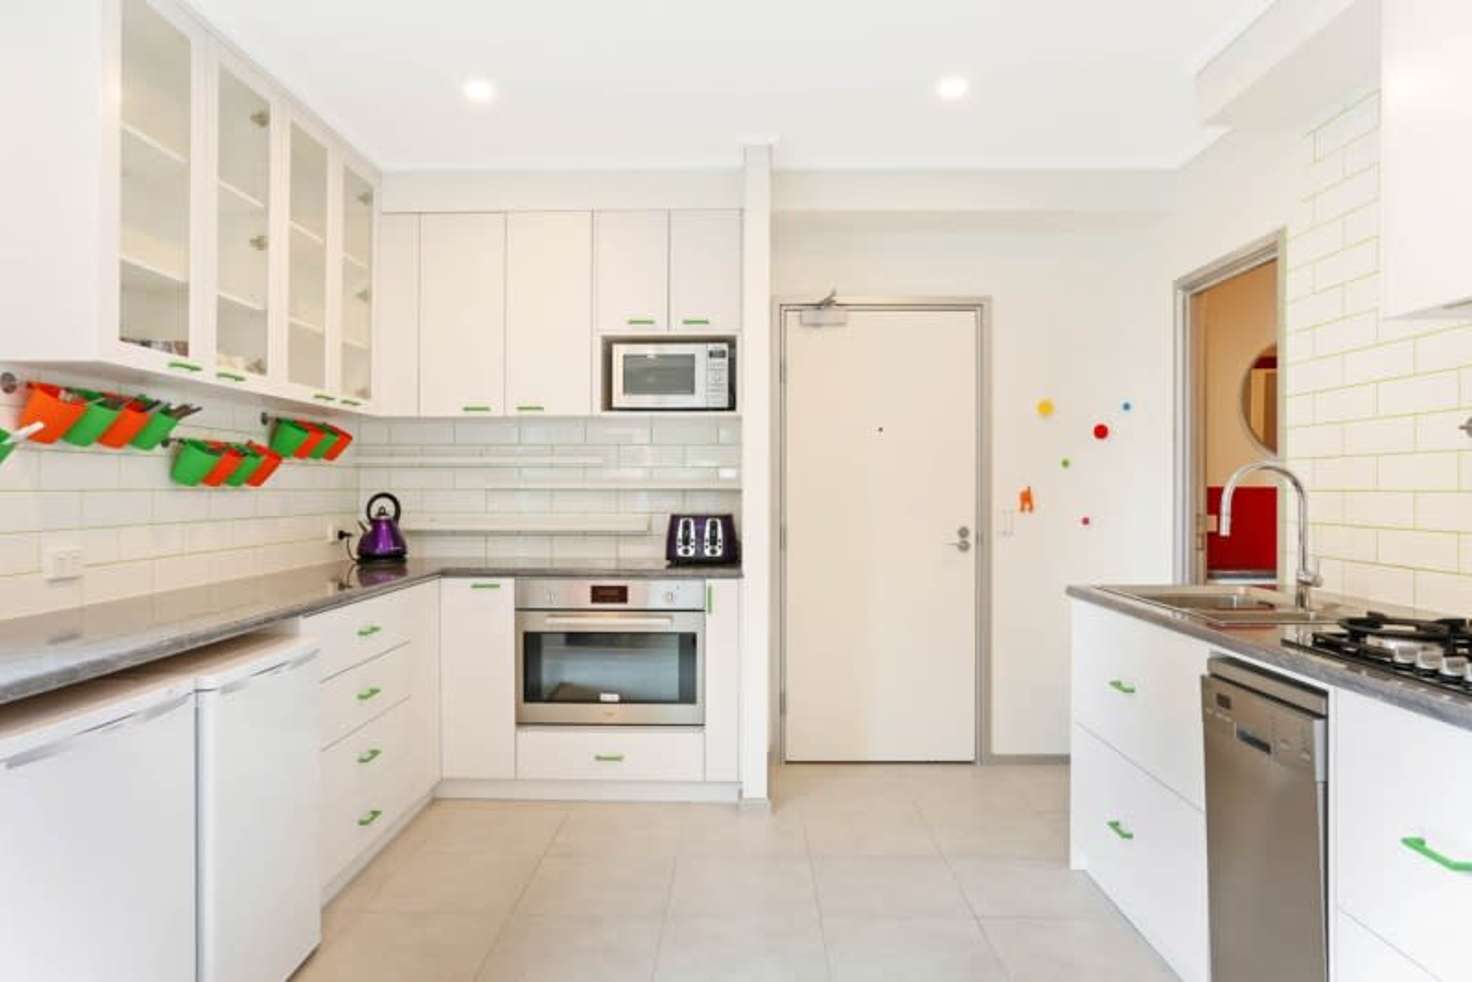 Main view of Homely apartment listing, 6208/570 Lygon Street, Carlton VIC 3053